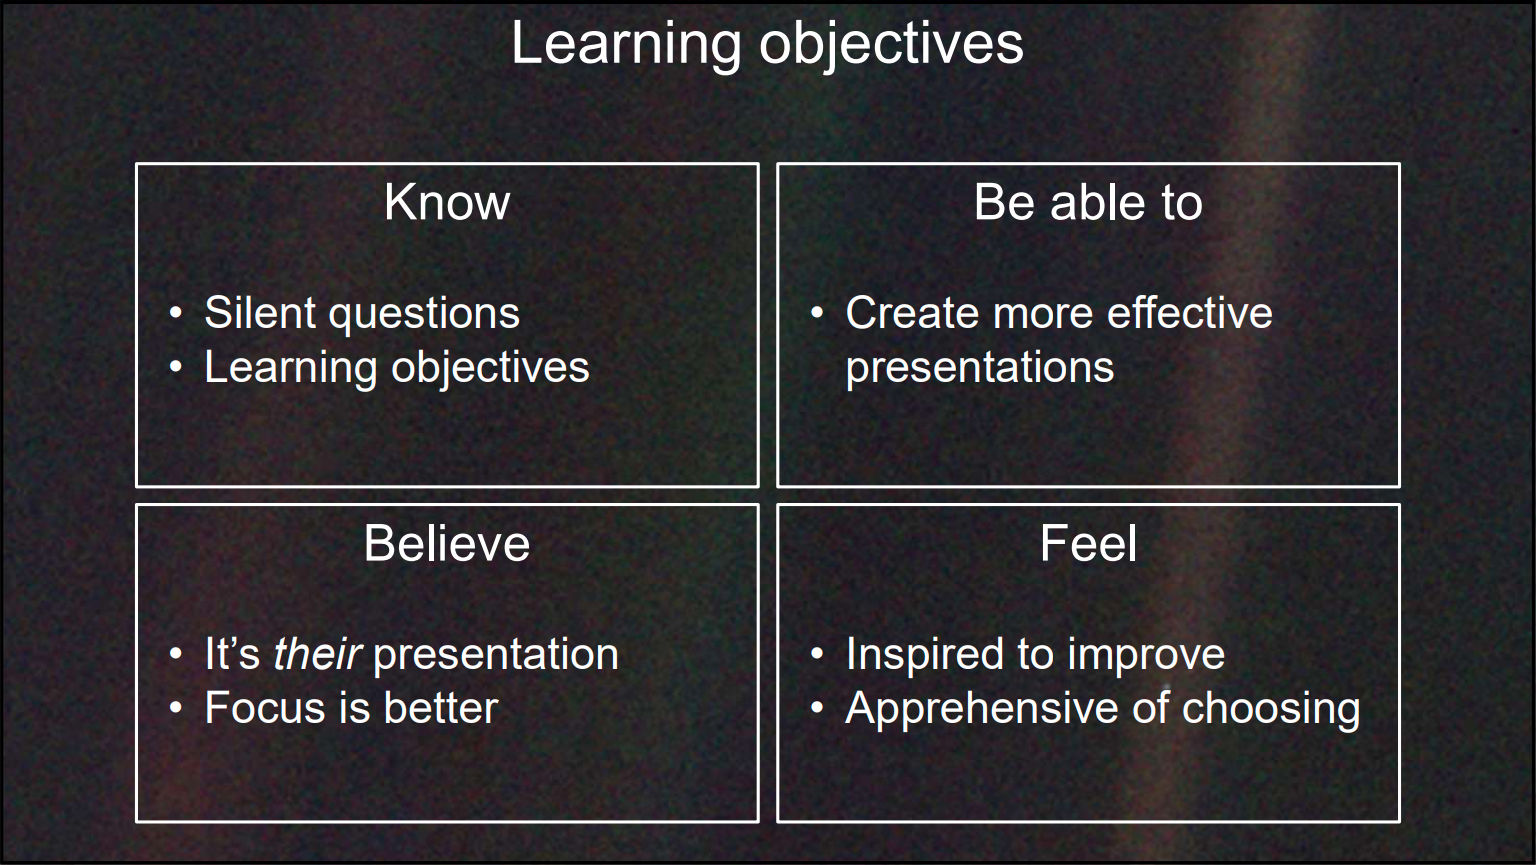 Learning objectives of this talk